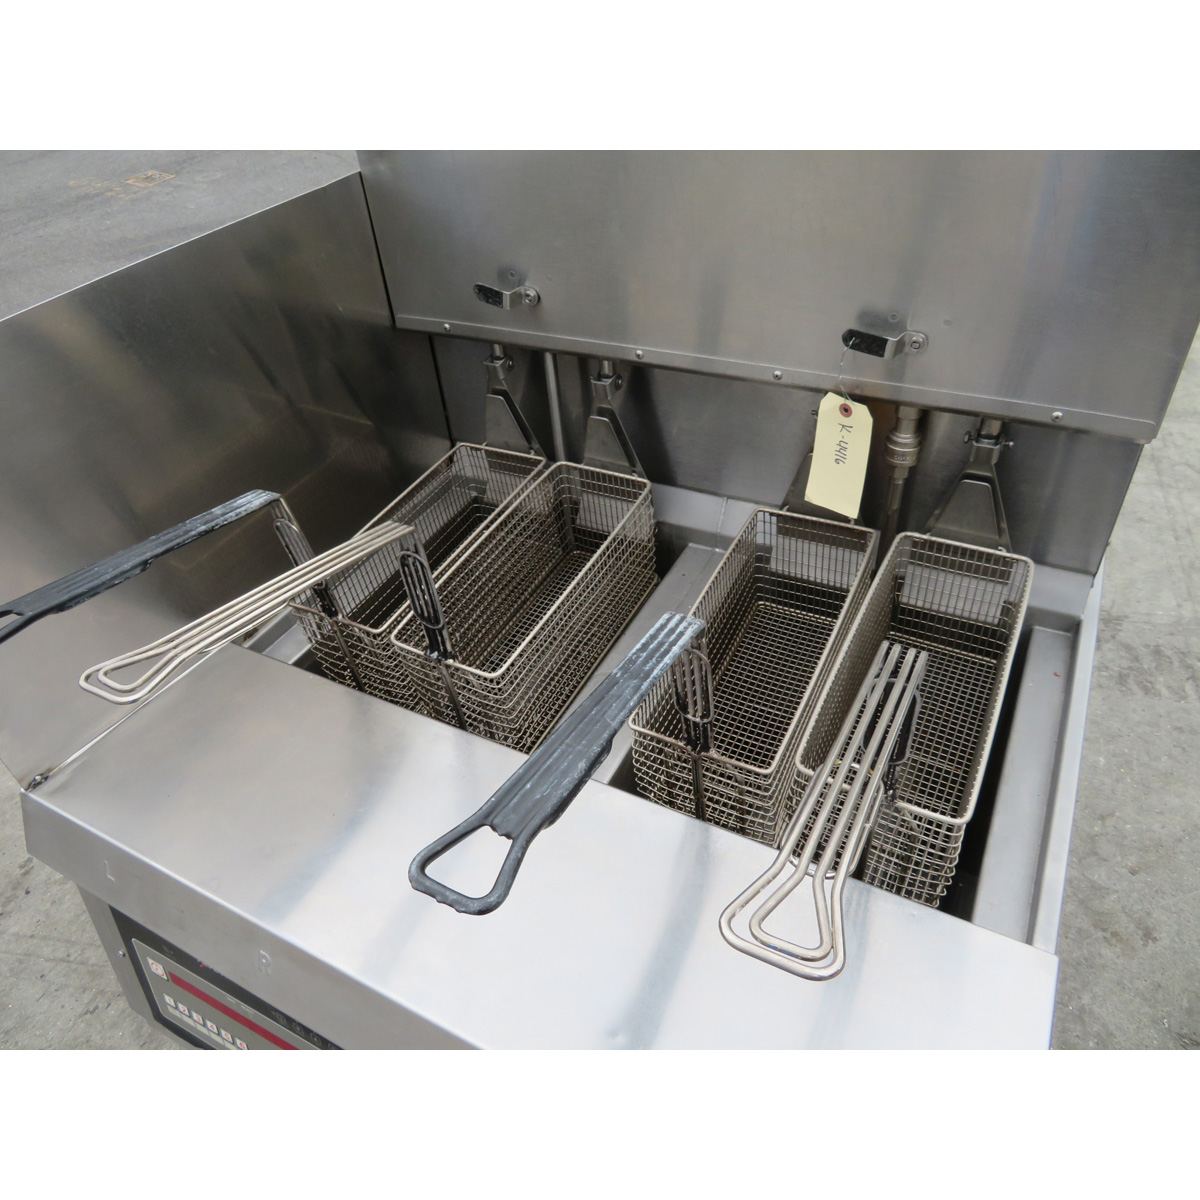 Henny Penny OGA-322 Natural Gas 2 Bank Fryer, Used Great Condition image 1